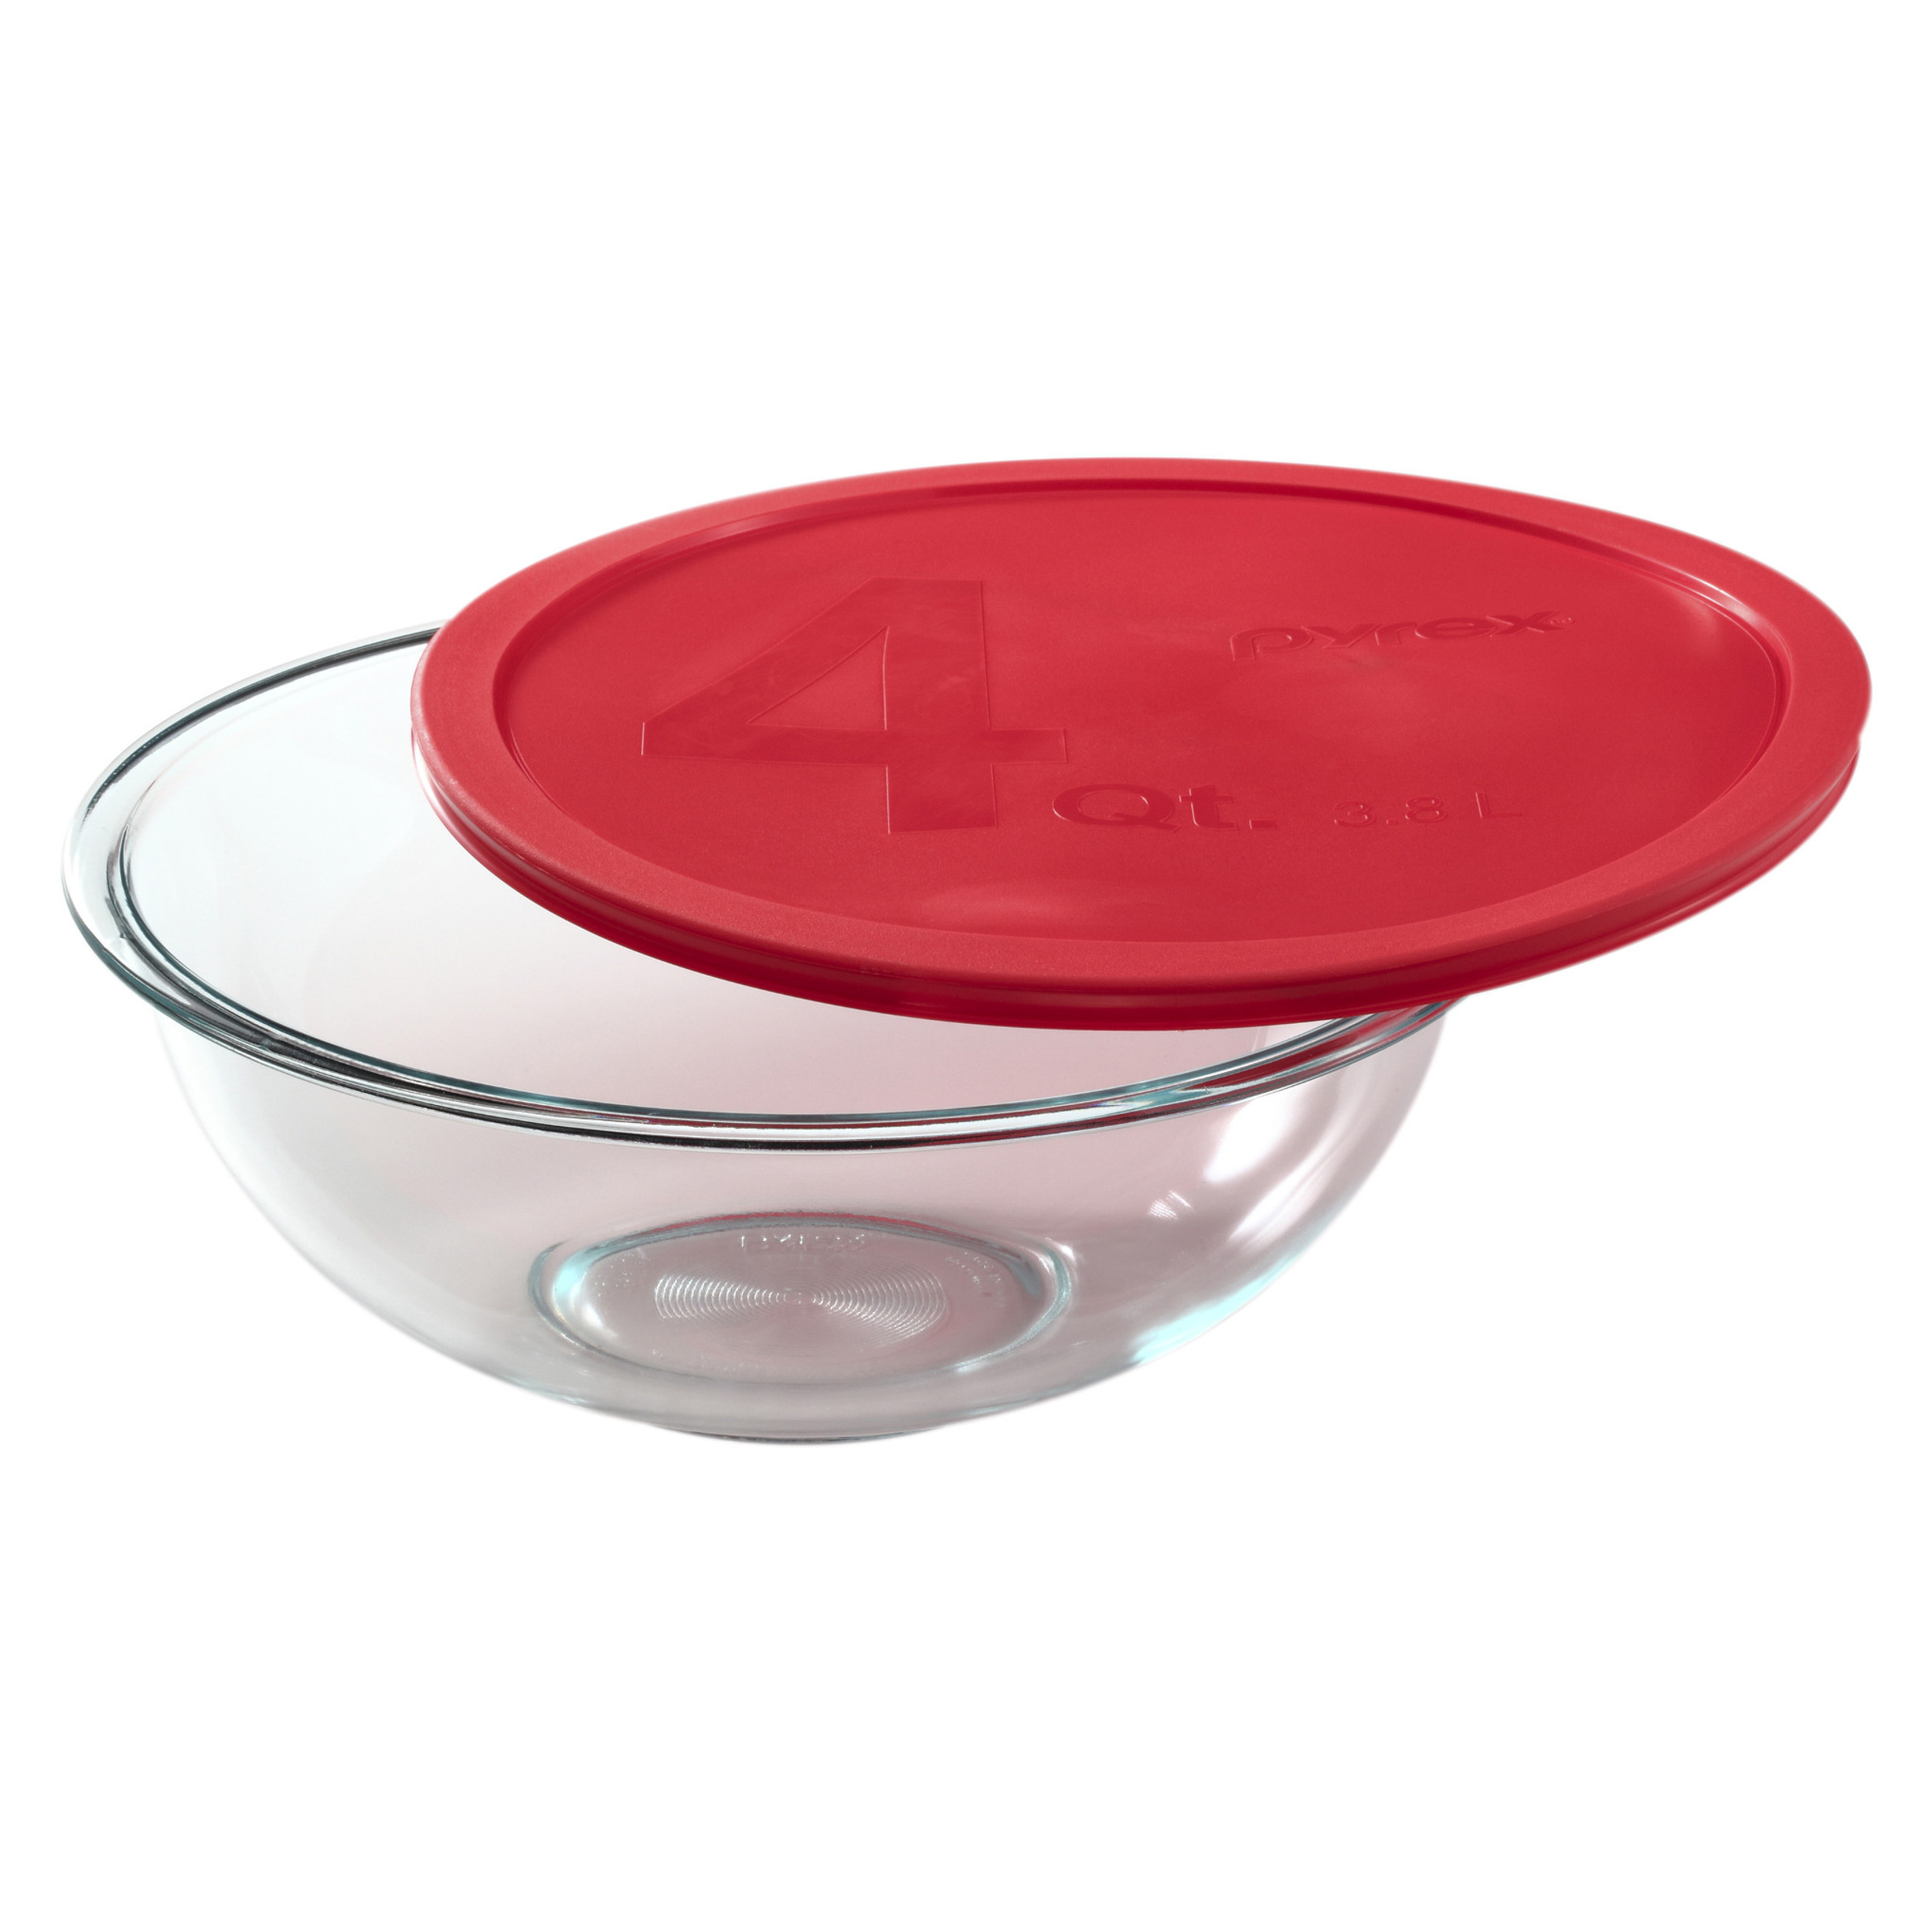 pyrex-4-quart-mixing-bowl-with-red-lid-larry-the-locksmith